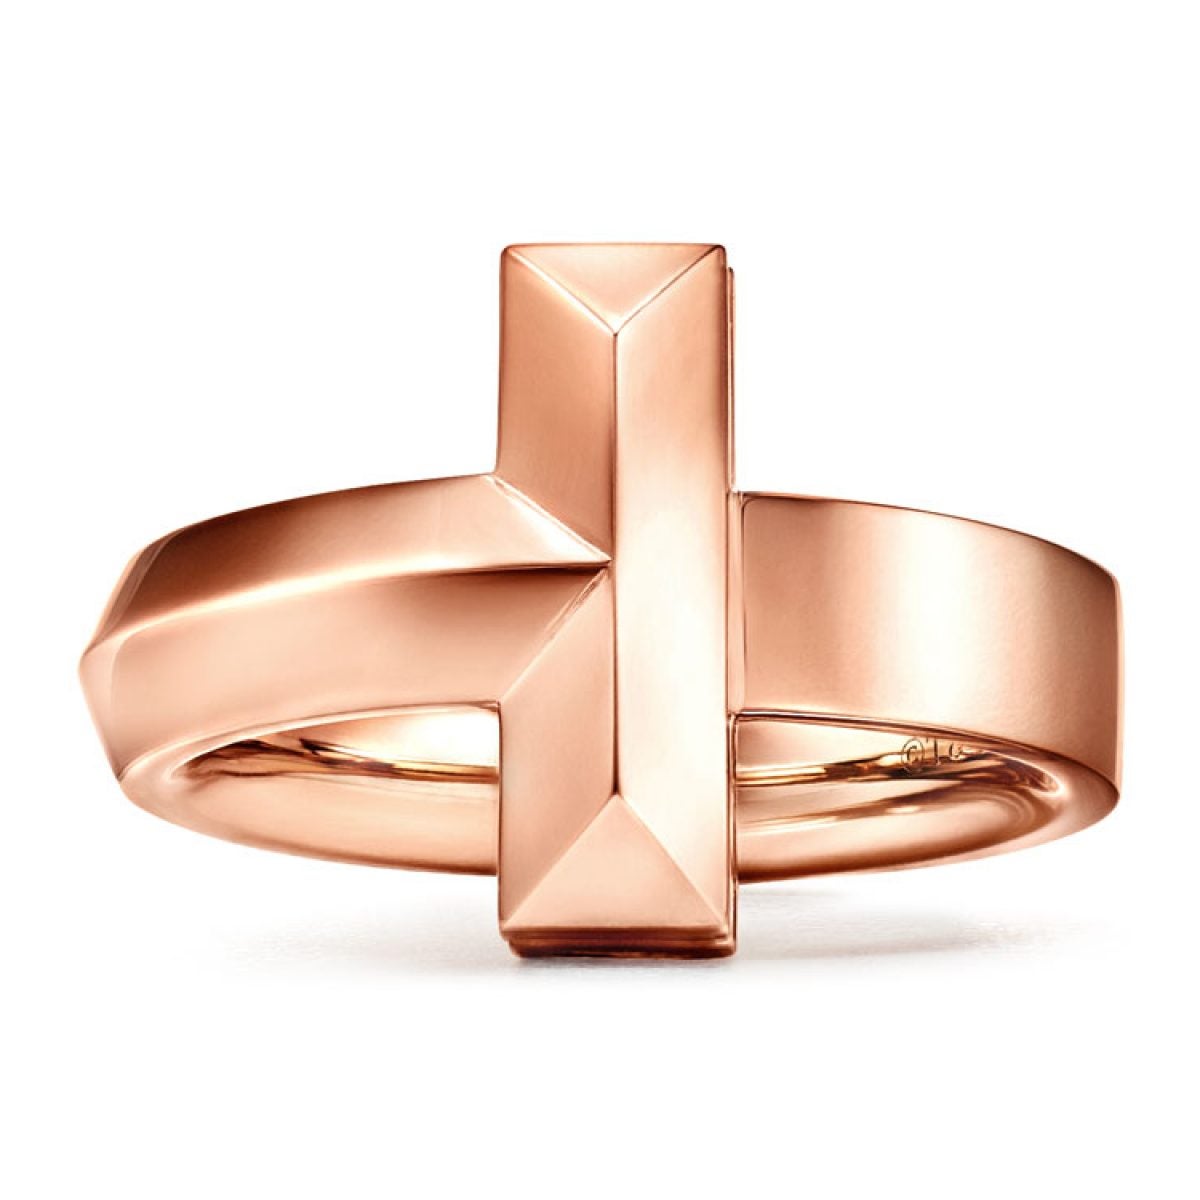 Tiffany & Co. Launches Latest Collection Tiffany T1